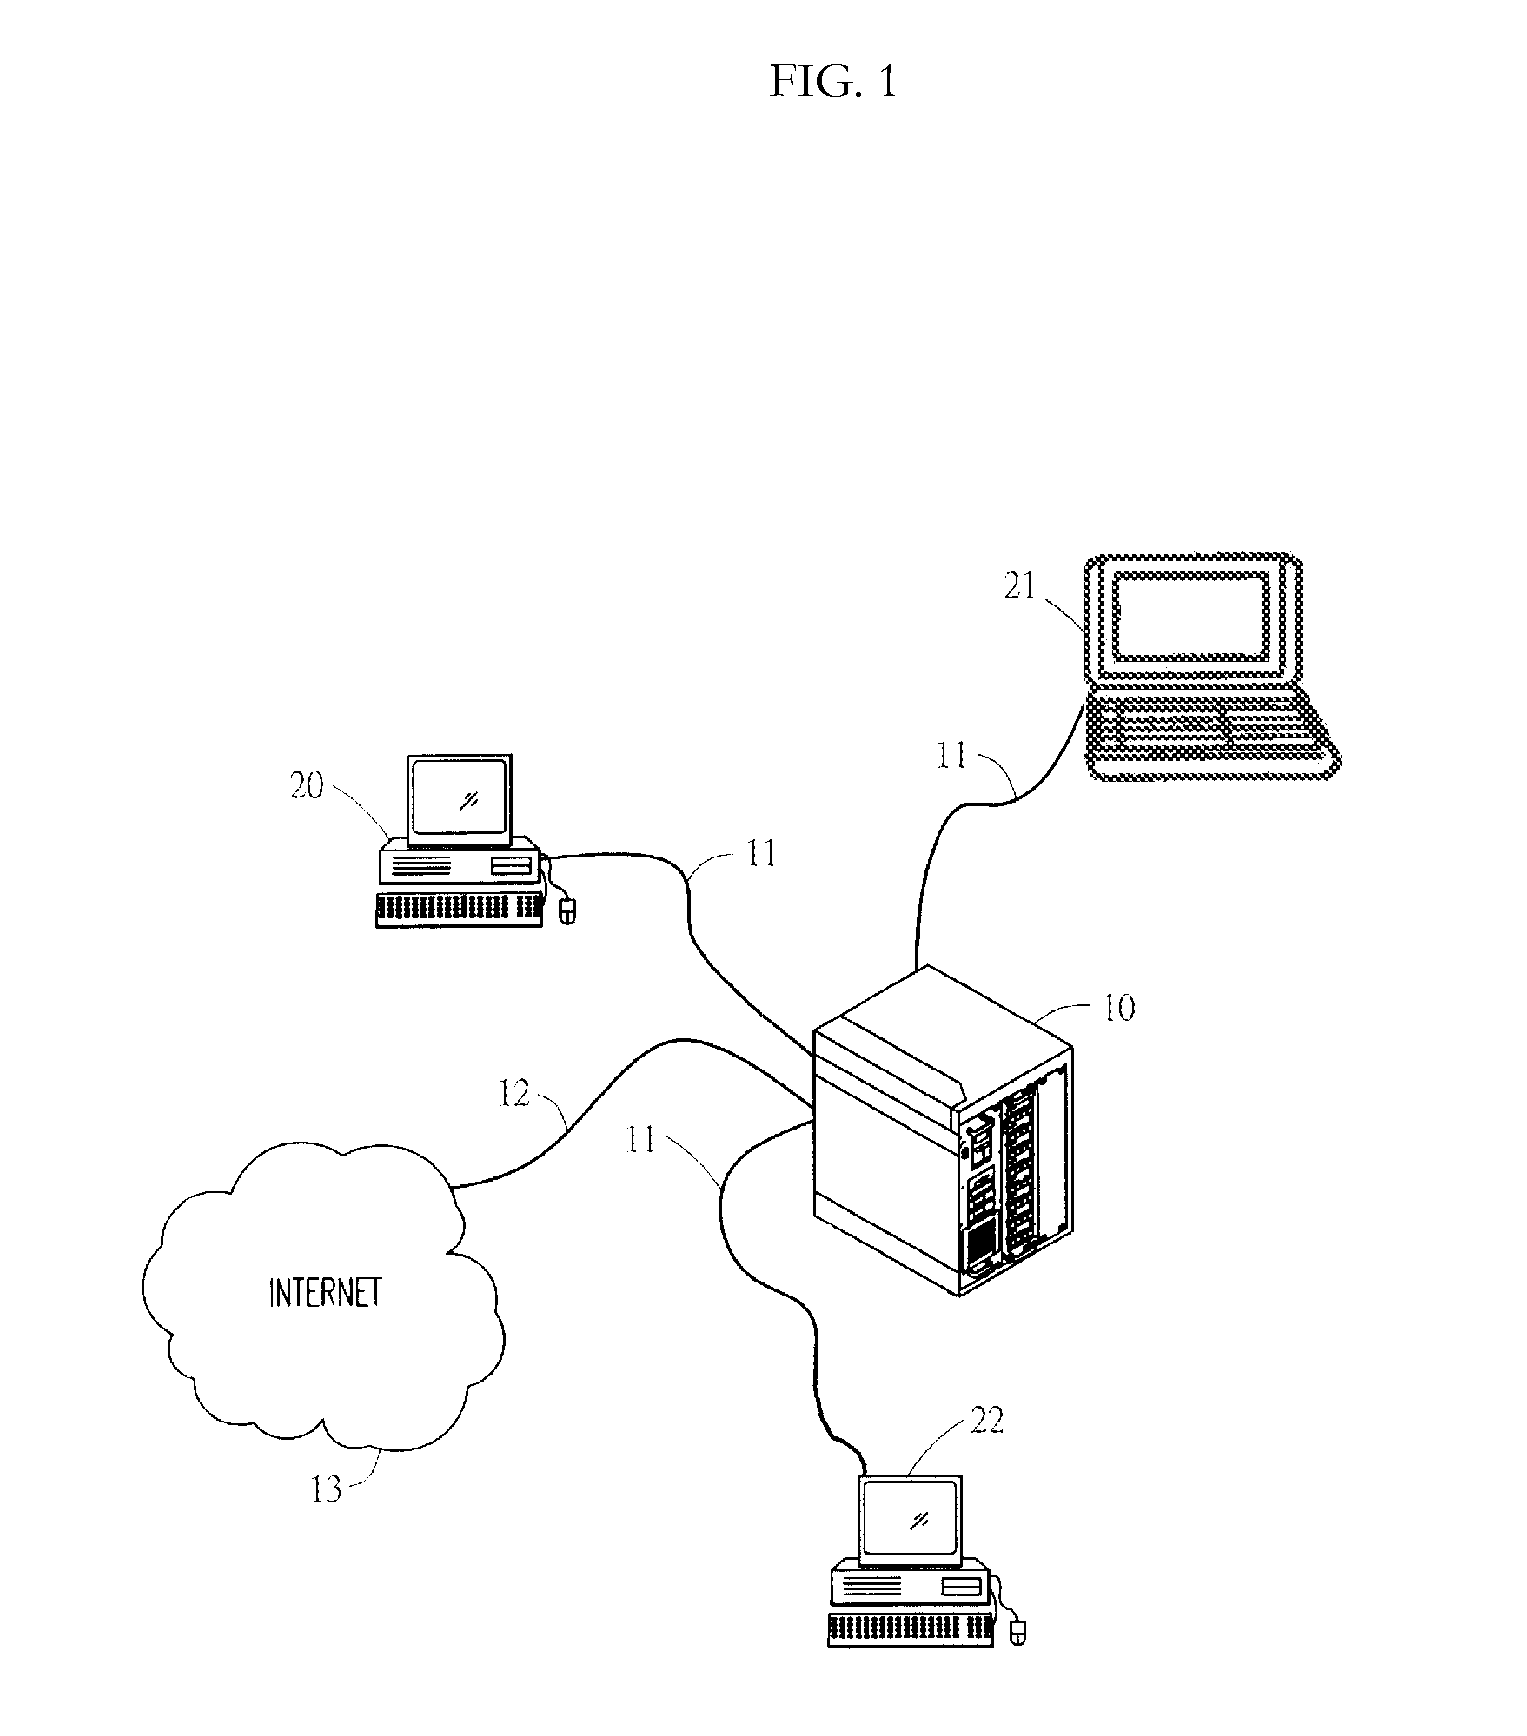 Supervised access computer network router